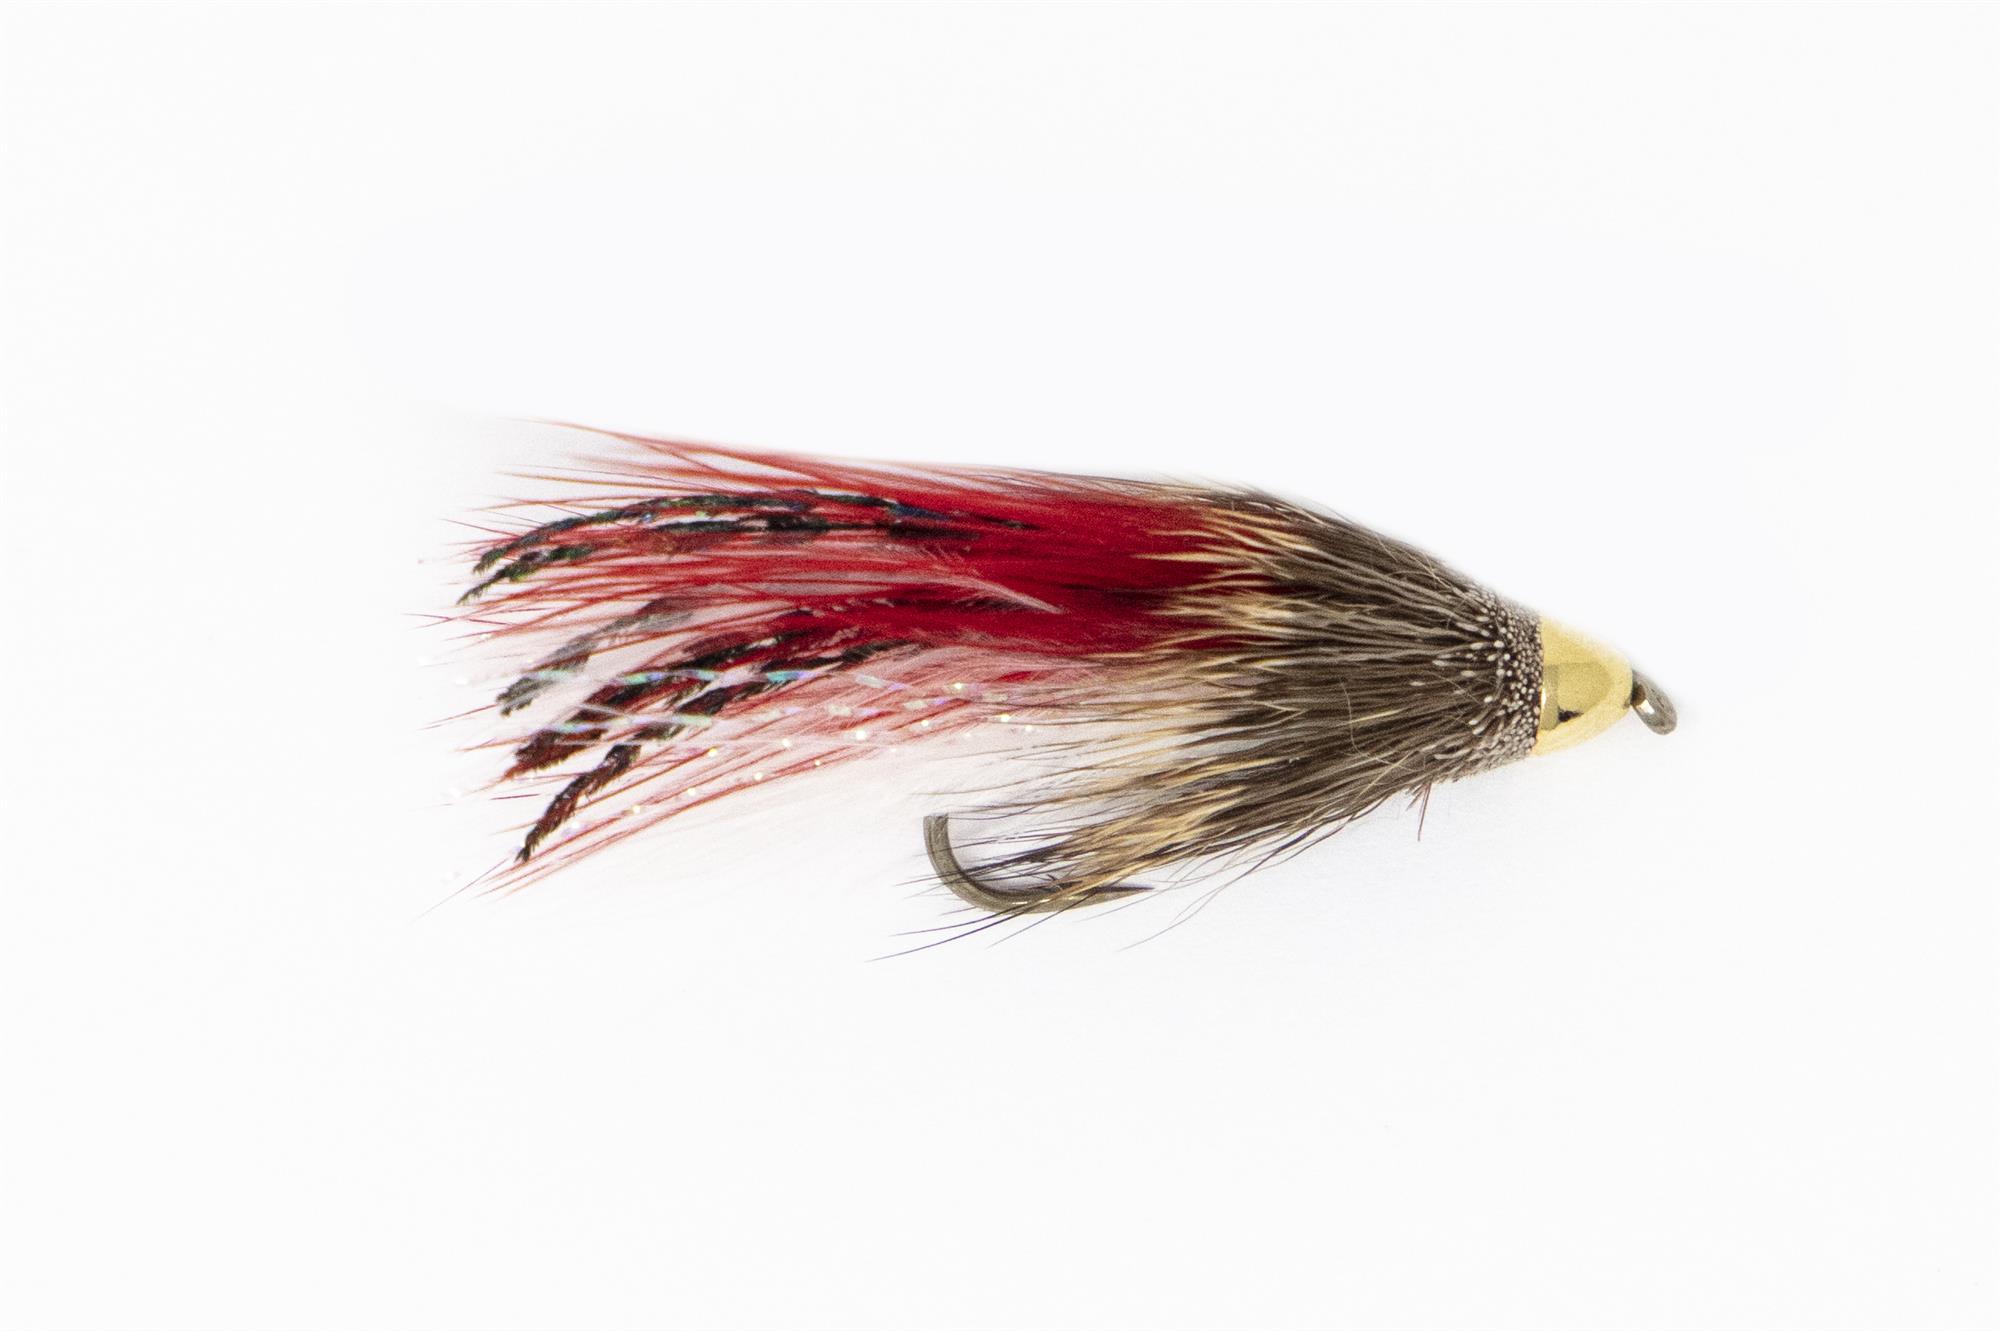 Buy Conehead Muddler Minnow flies online at The Fly Fishers for fly fishing trout.